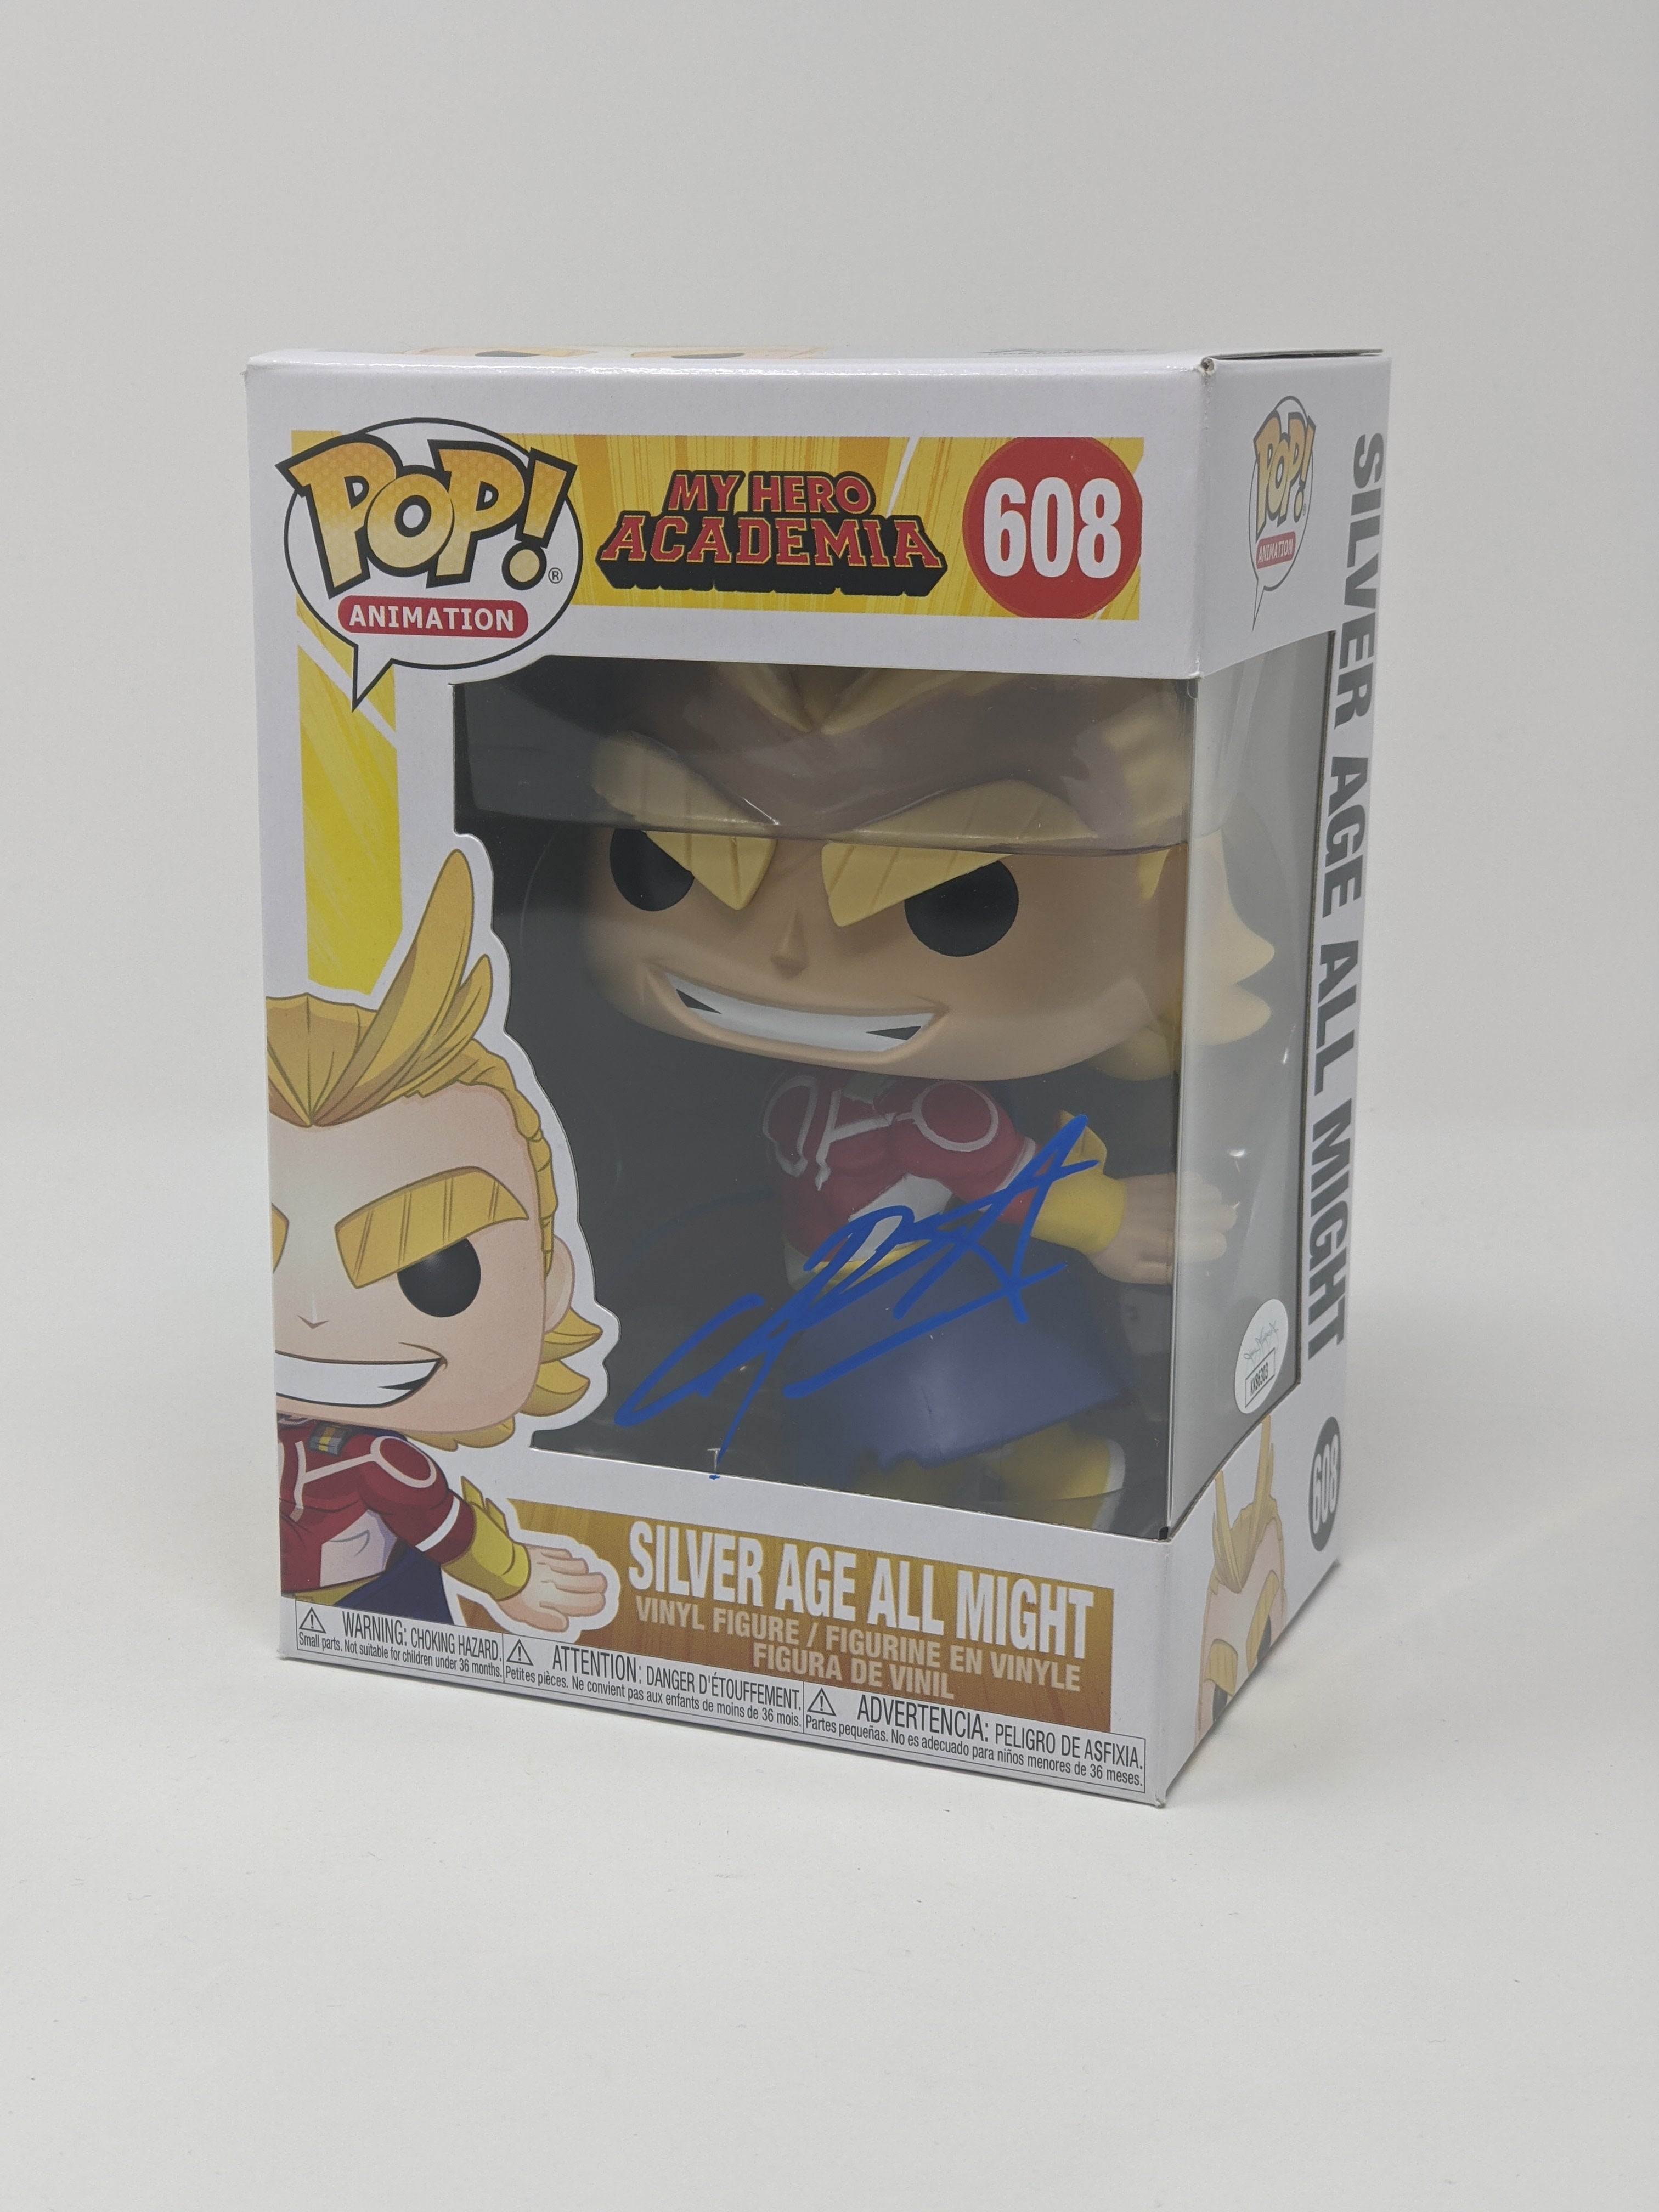 Chris Sabat My Hero Academia Silver Age All Might #608 Signed Funko Pop JSA Certified Autograph